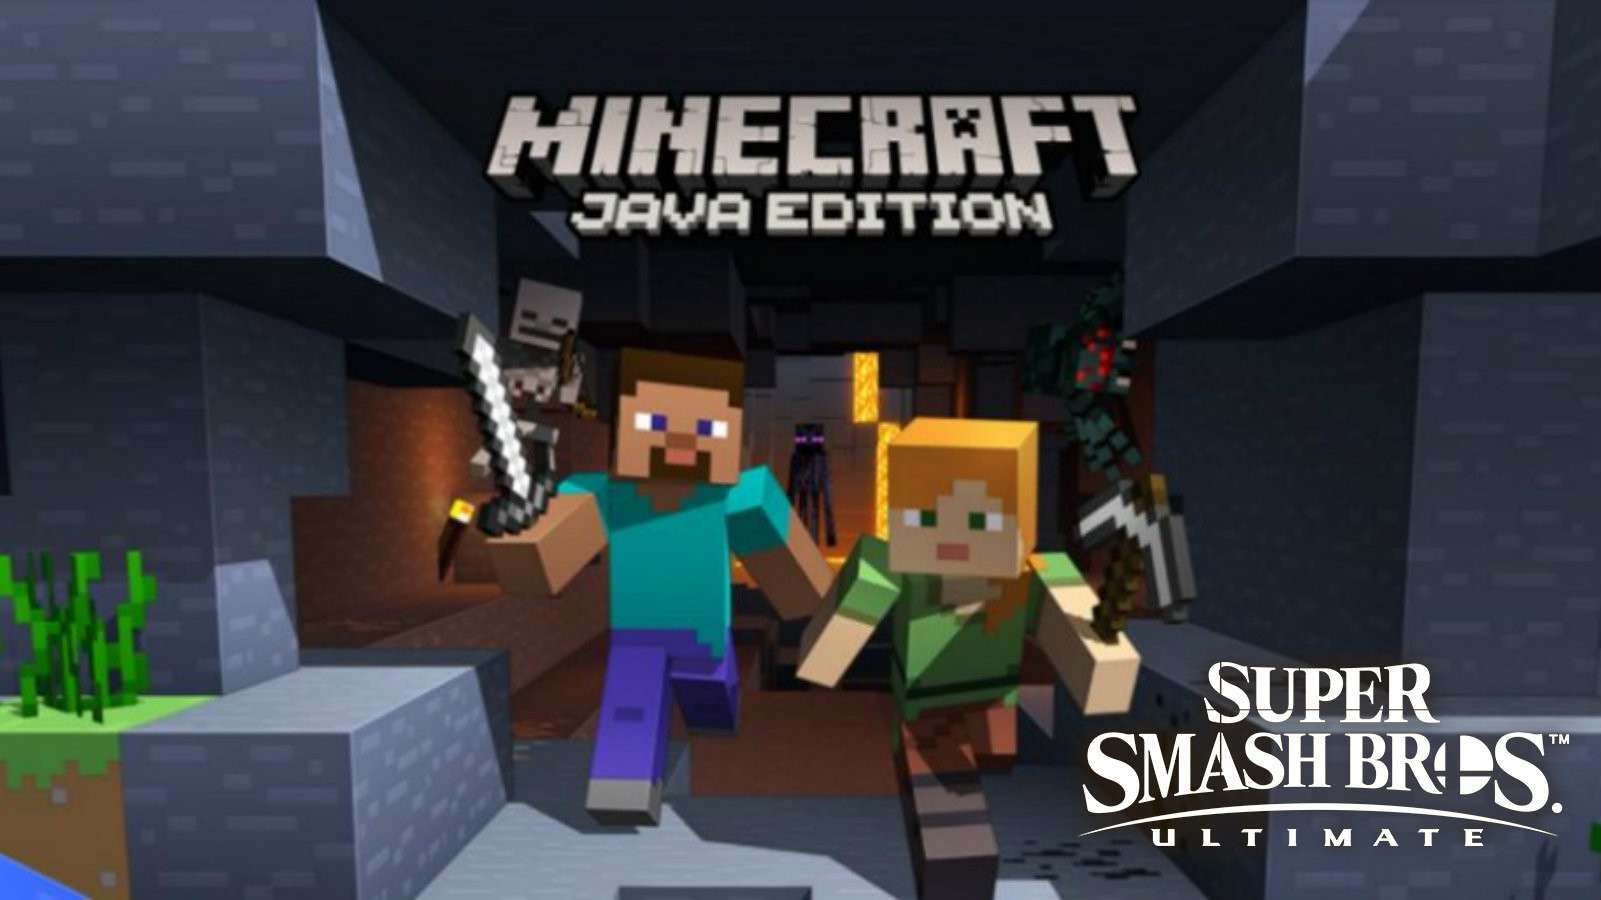 Minecraft Steve and Alex in Smash